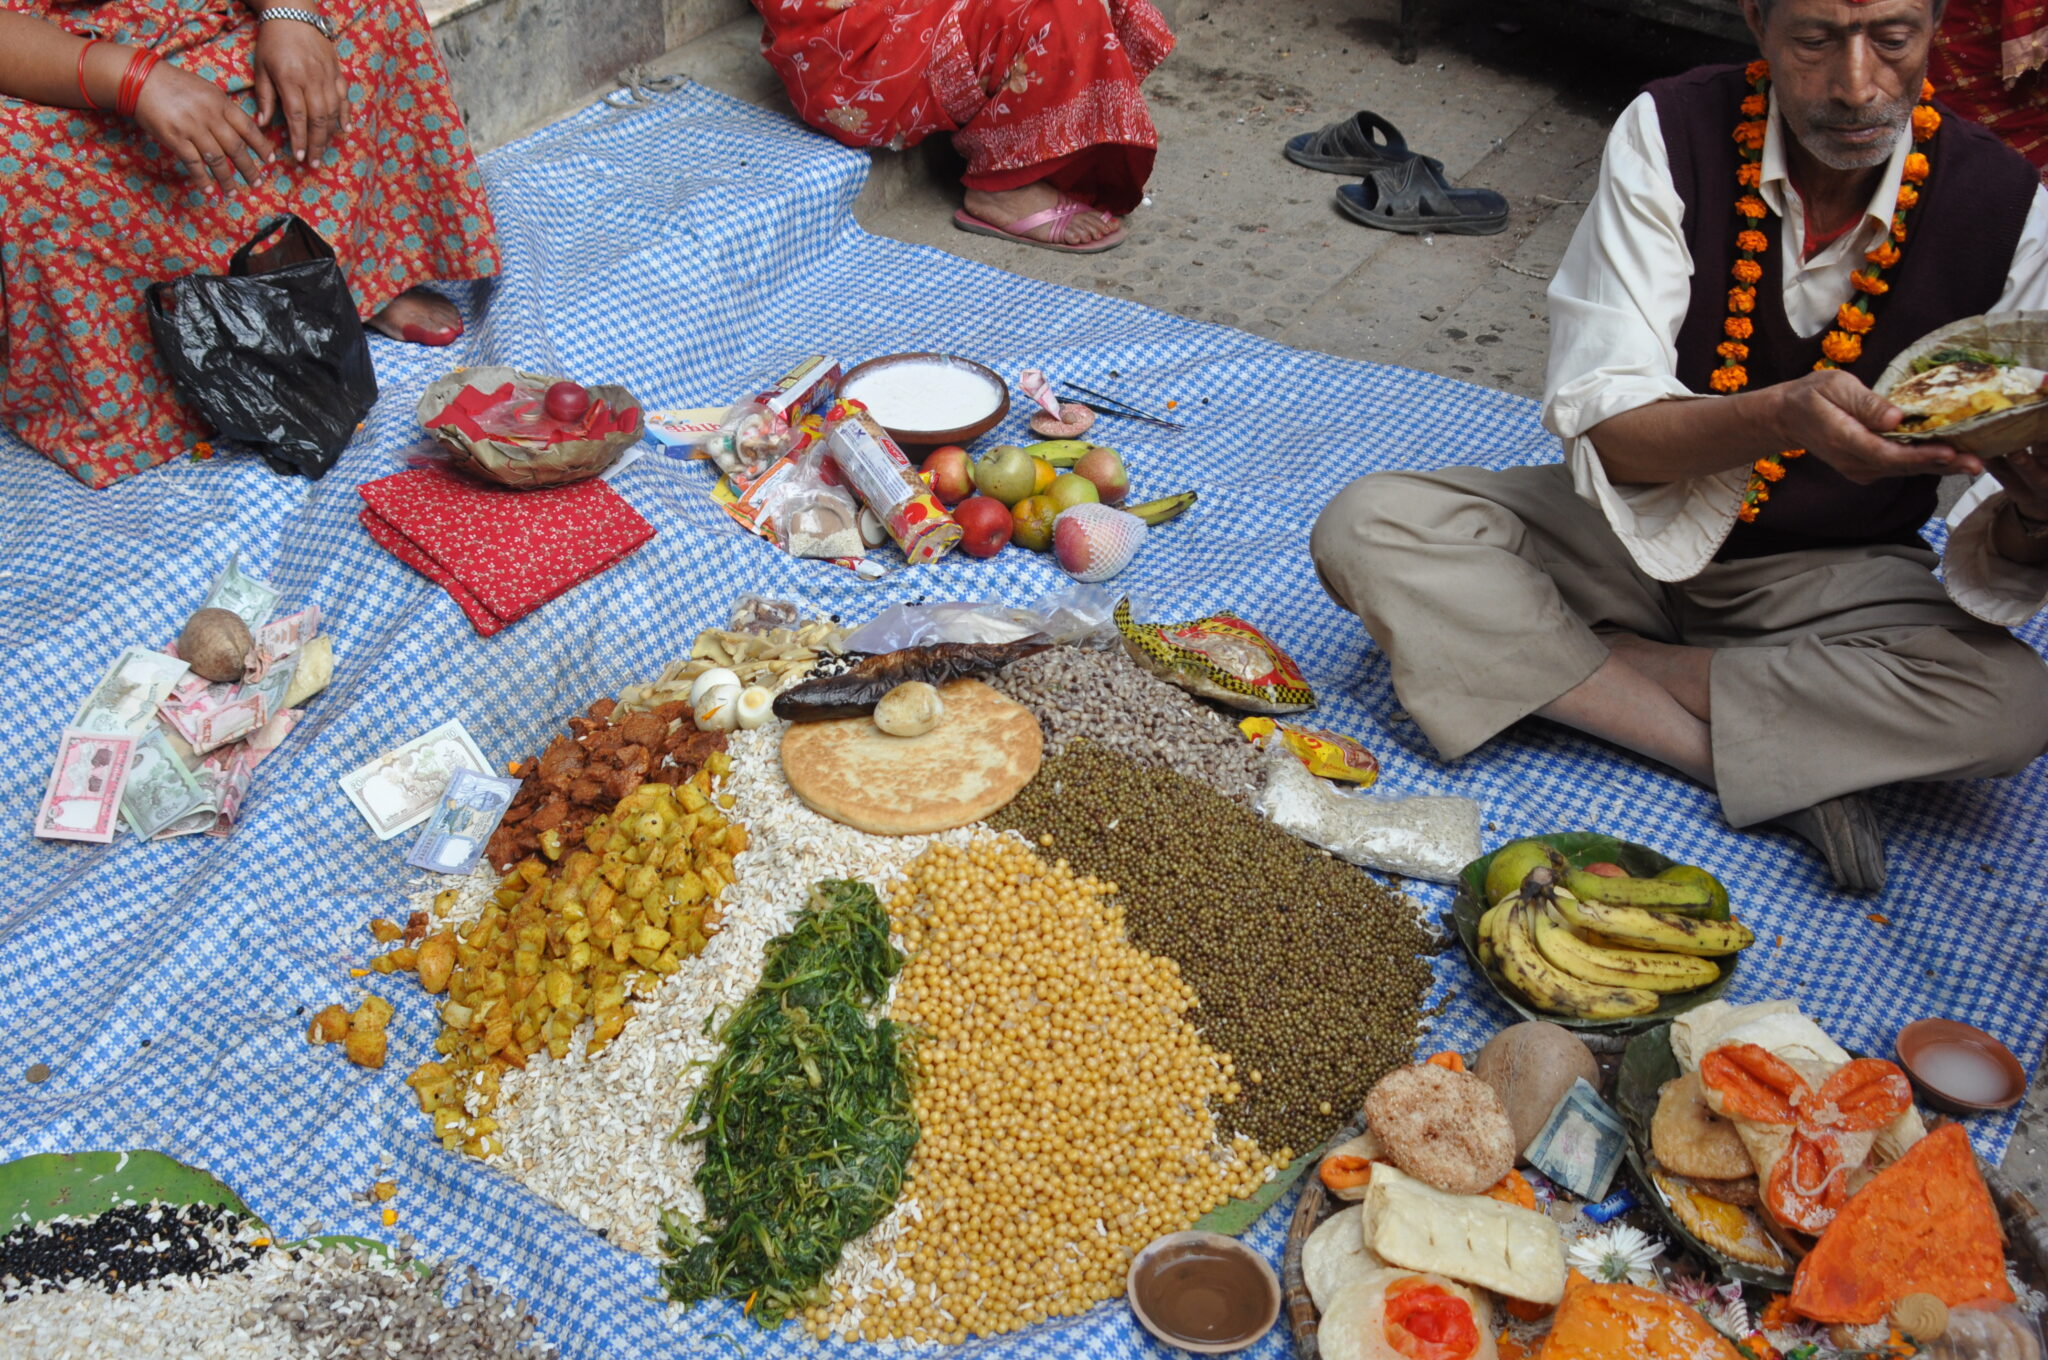 Arrangement of grains, vegetables, and meats surrounded by worshippers and other offerings atop blue gingham cloth